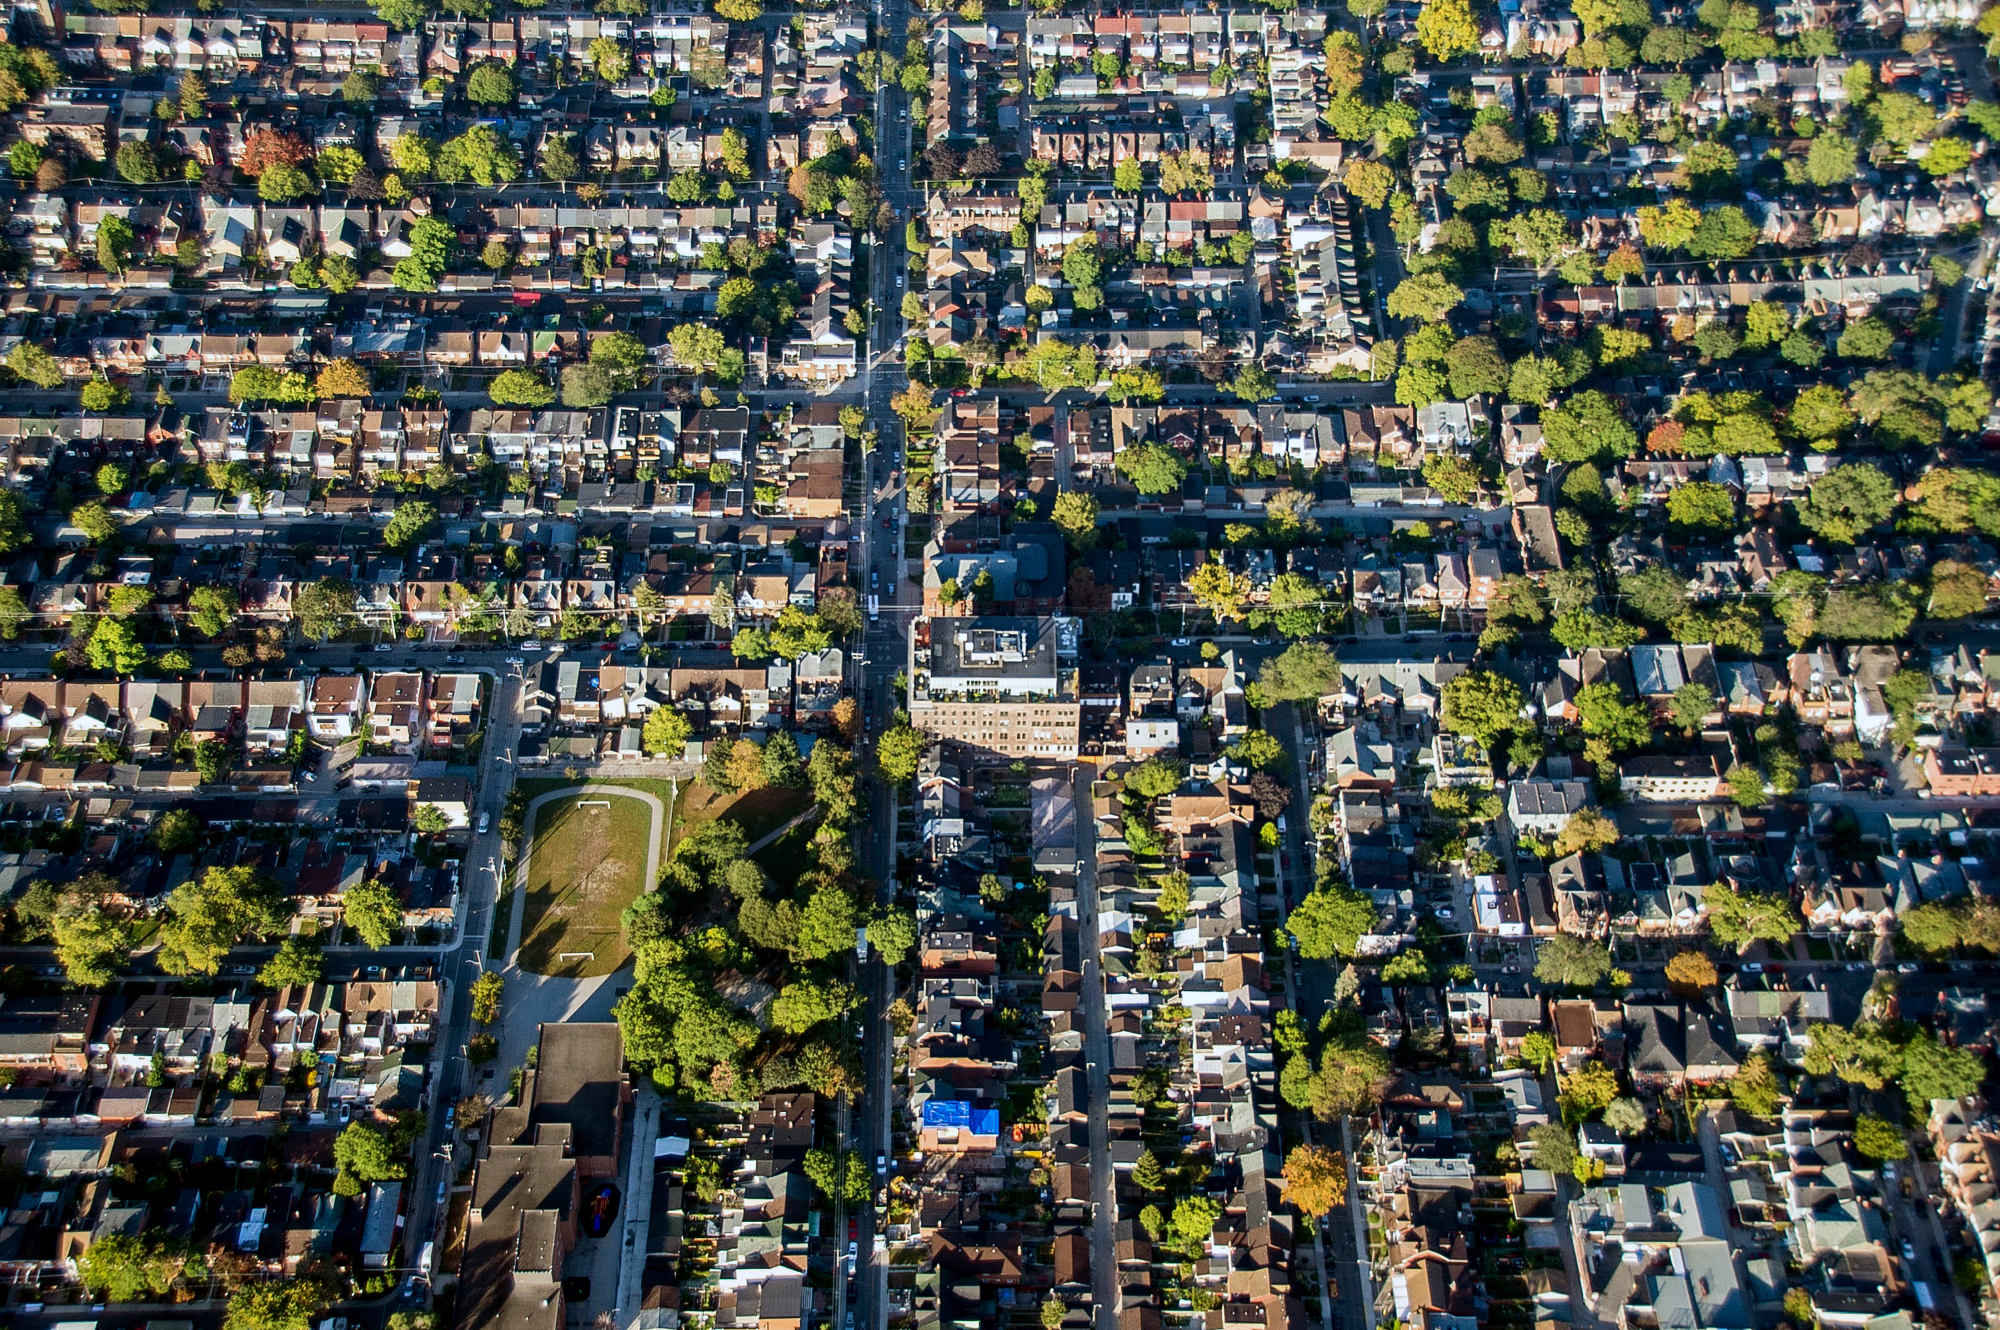 Homes stand in this aerial photograph taken above Toronto, Ontario.